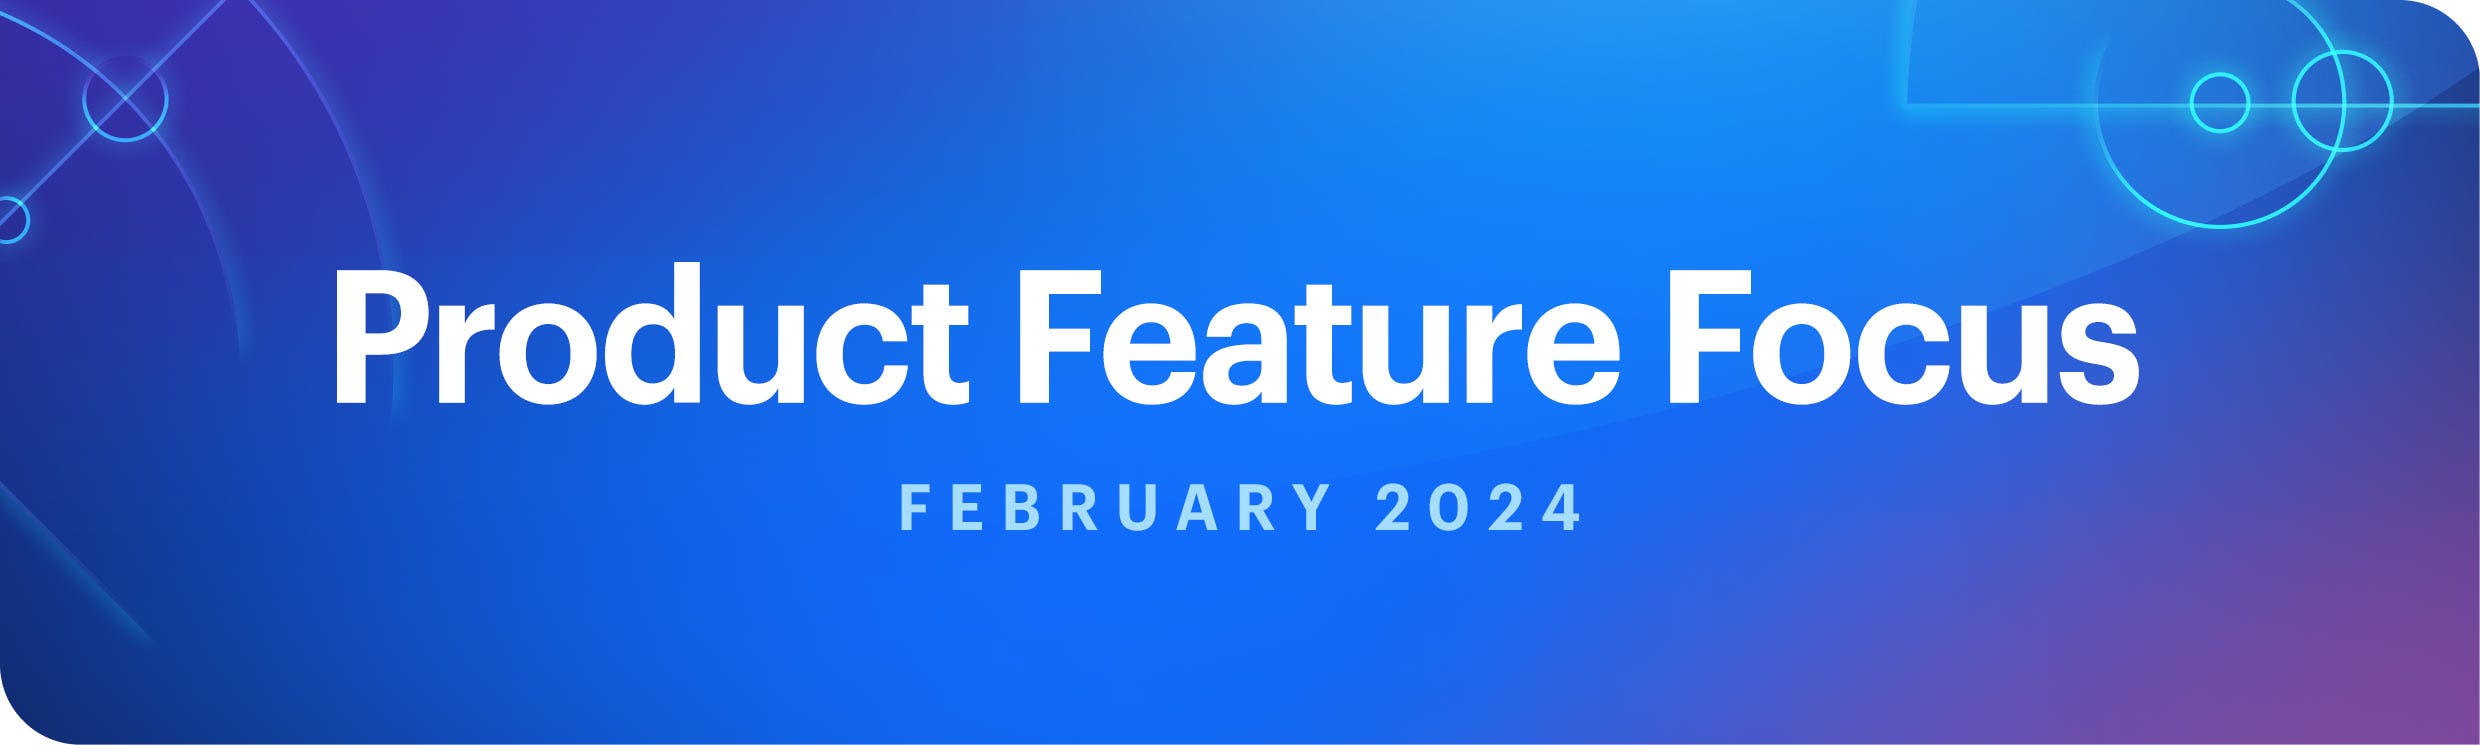 Banner image with text - "Product Feature Focus: February 2024"